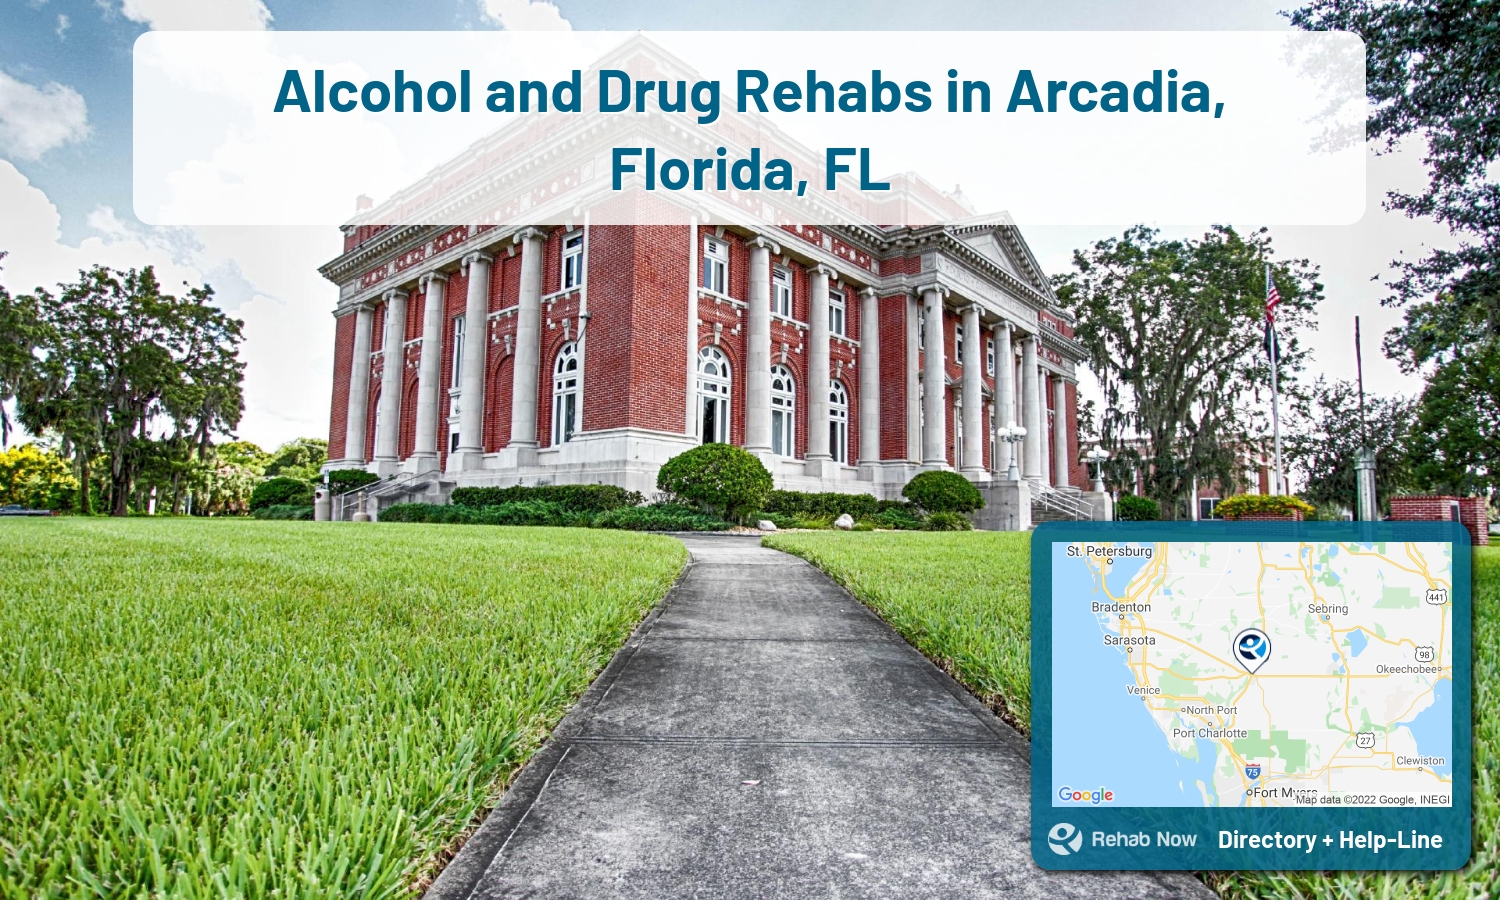 Drug rehab and alcohol treatment services nearby Arcadia, FL. Need help choosing a treatment program? Call our free hotline!